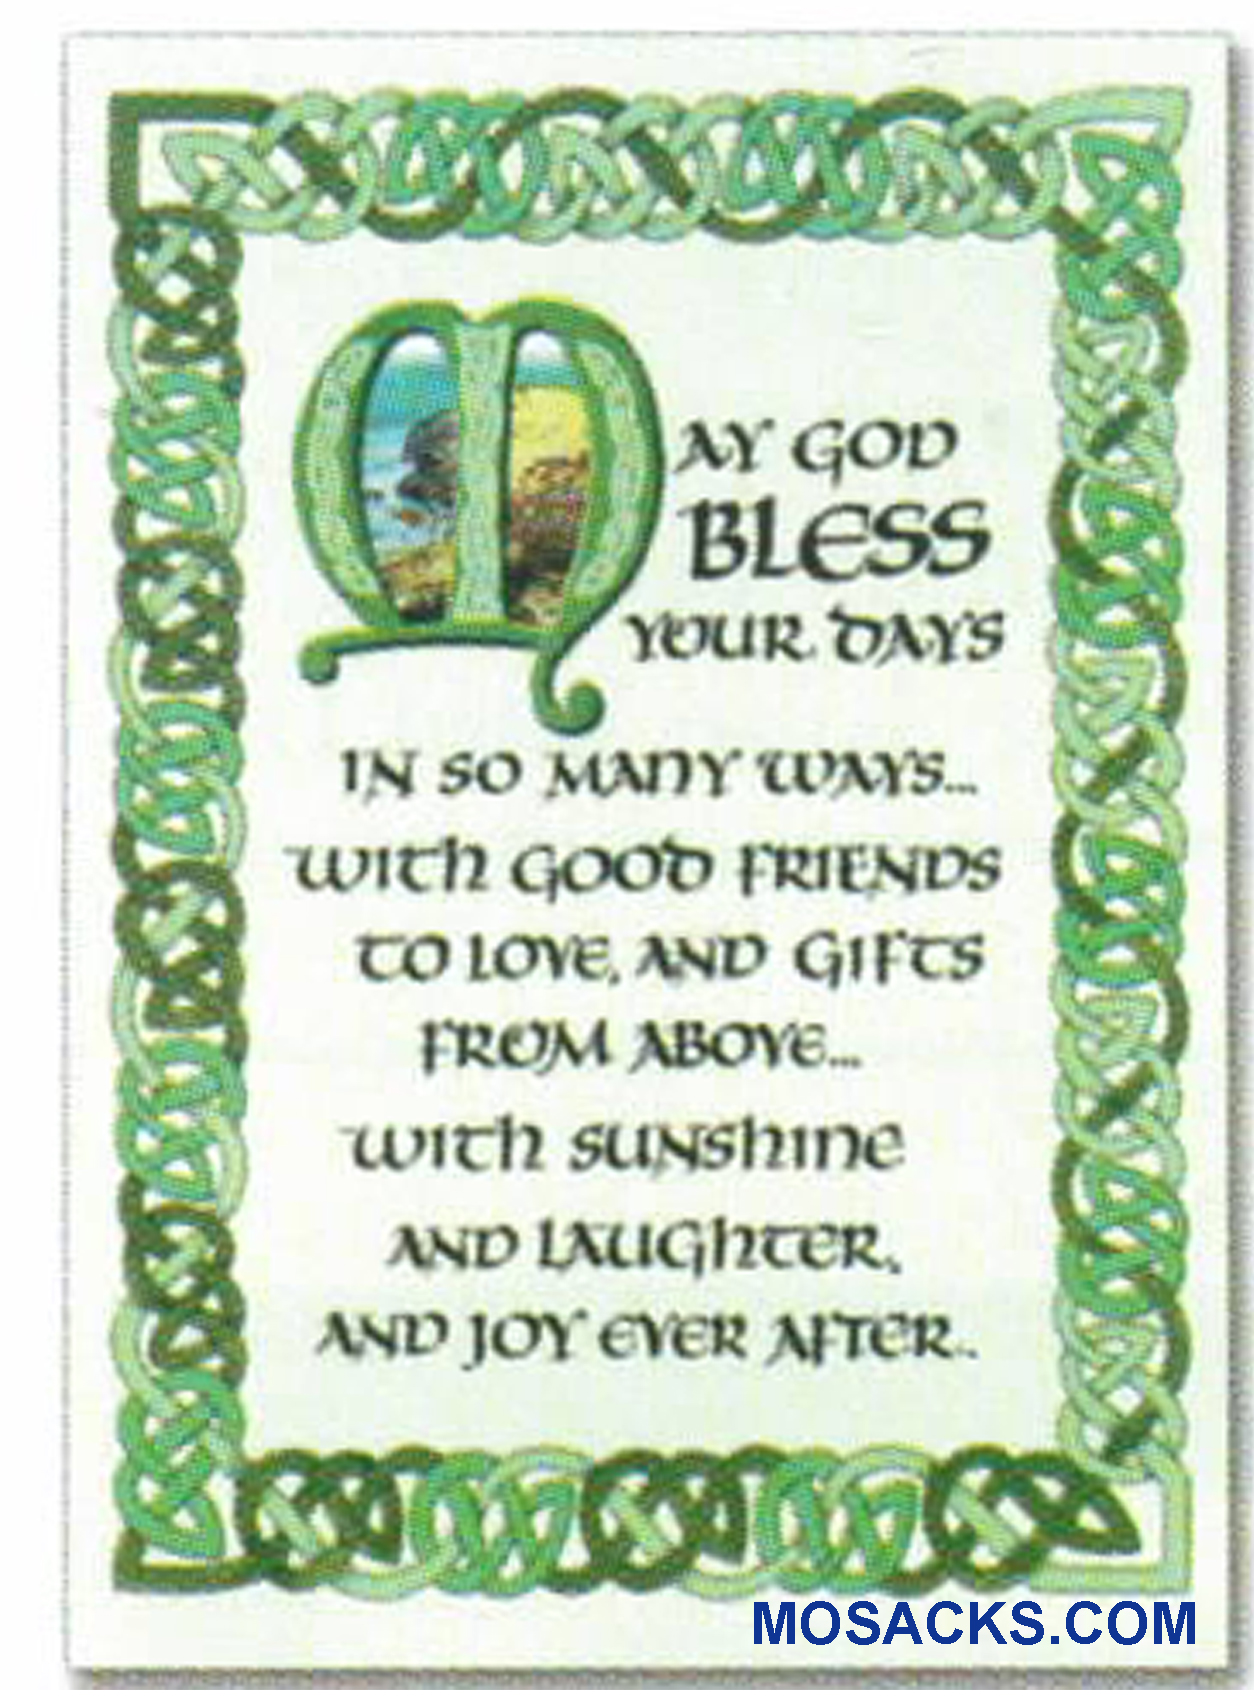 May God Bless Your Days In So Many Ways Note Card-WCB1613 An Irish Blessing Note Card or St. Patrick's Day Note Card